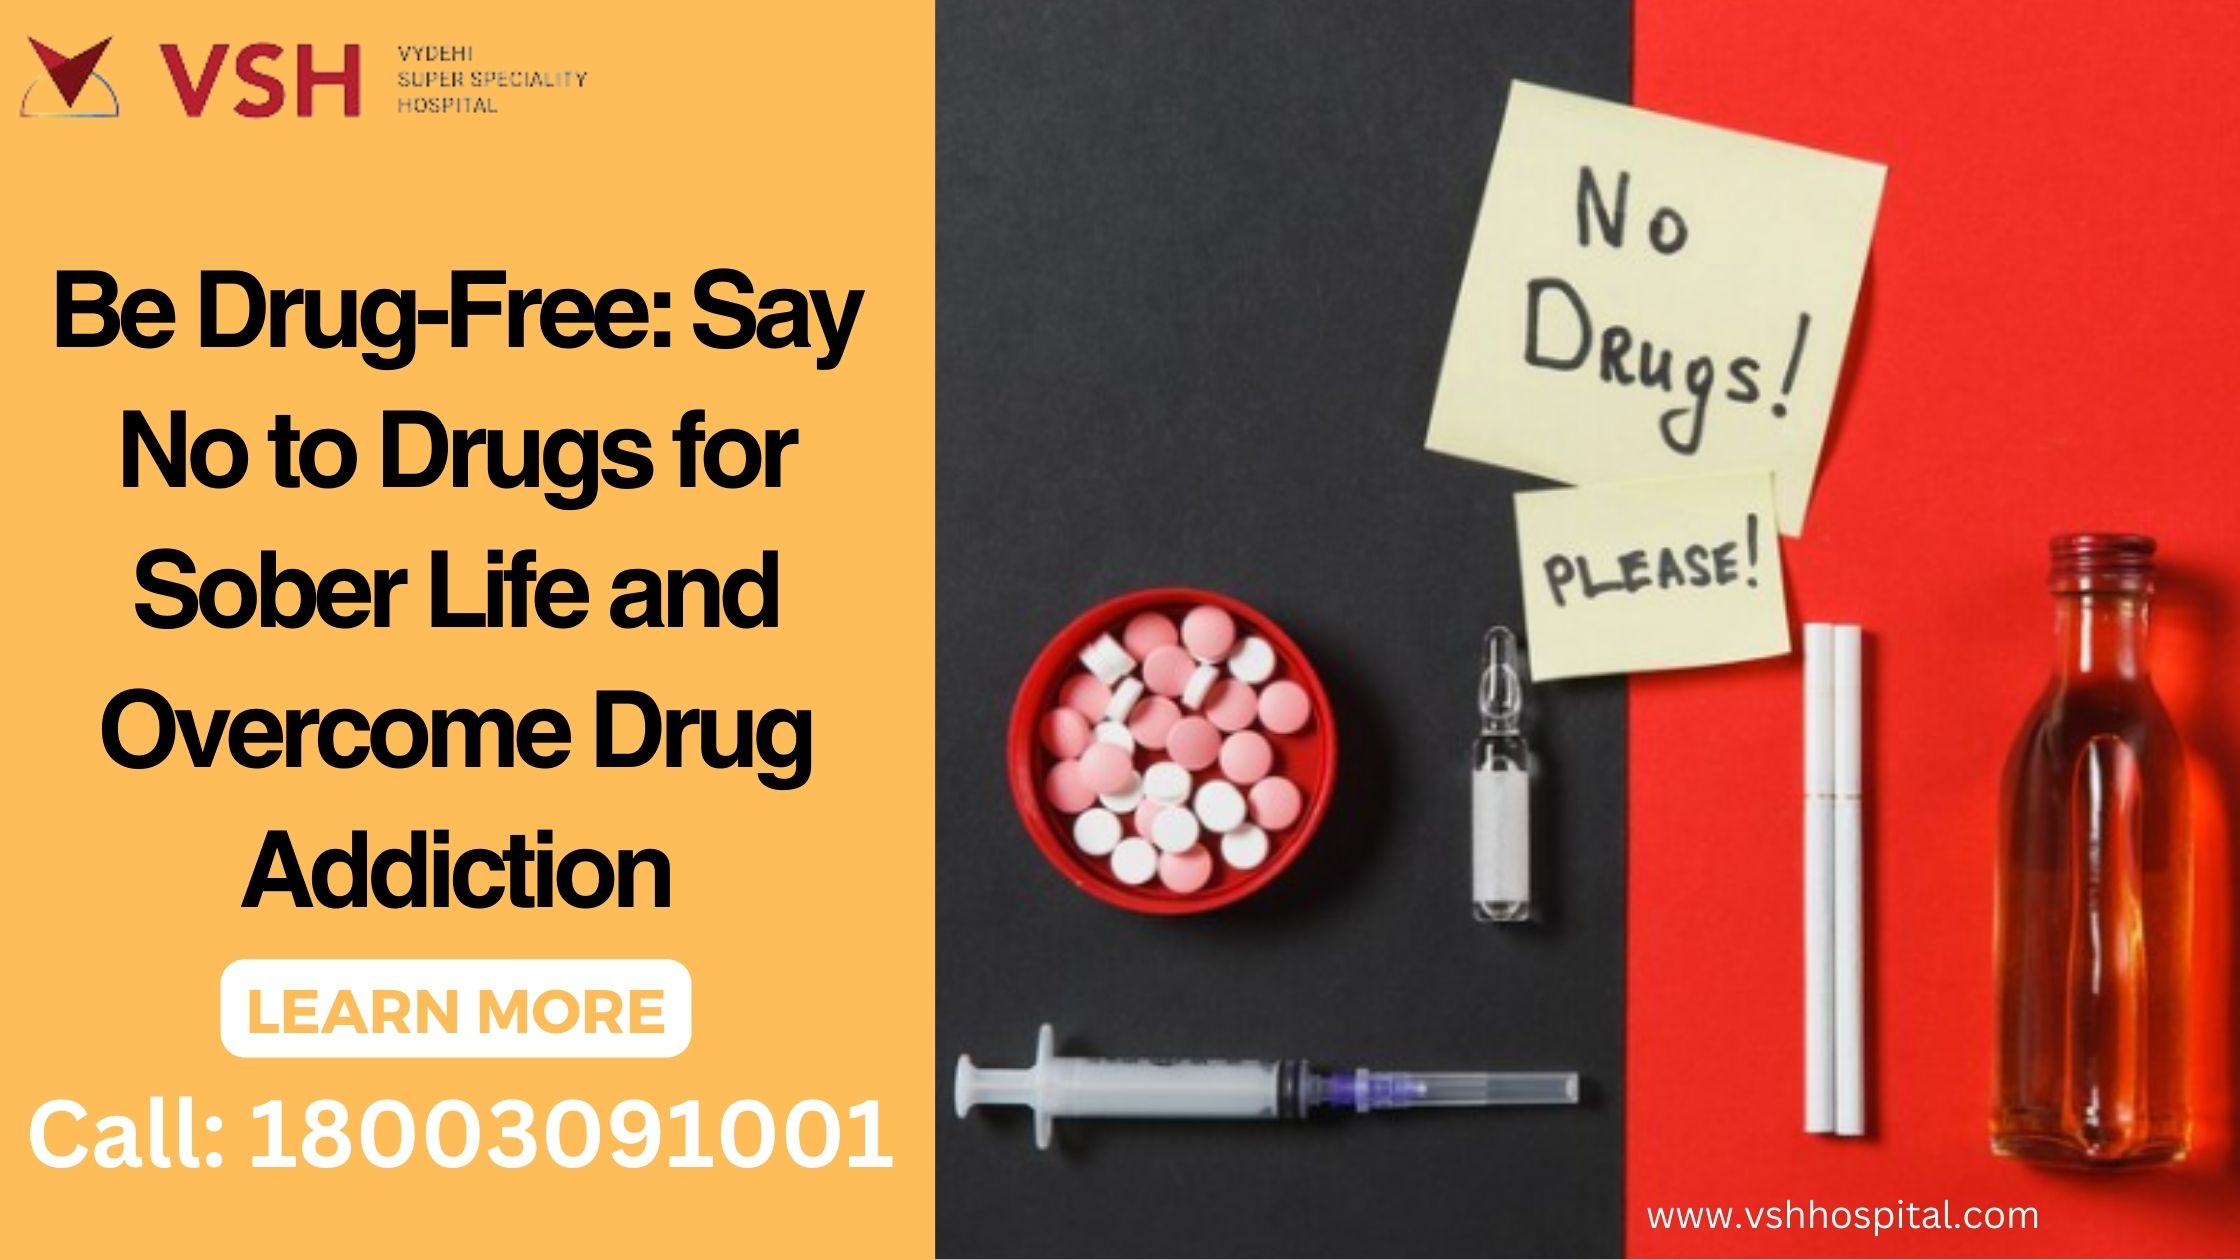 Be Drug-Free: Say No to Drugs for Sober Life and Overcome Drug Addiction